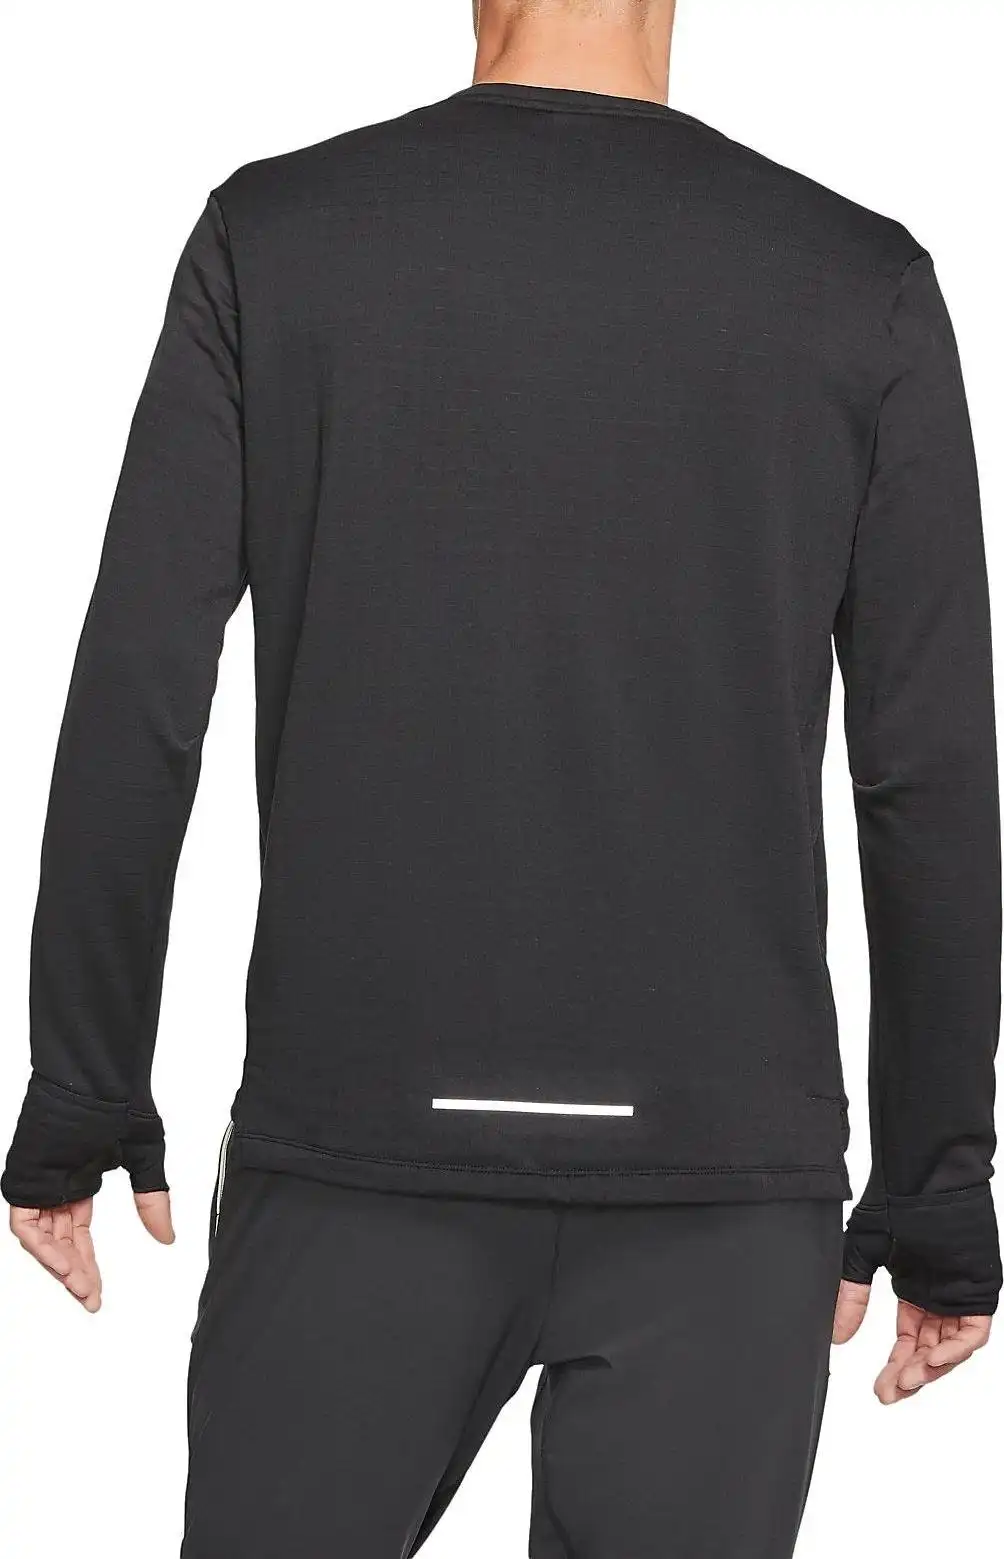 Nike Long Sleeve T-Shirt with Dry-Fit Technology - Black